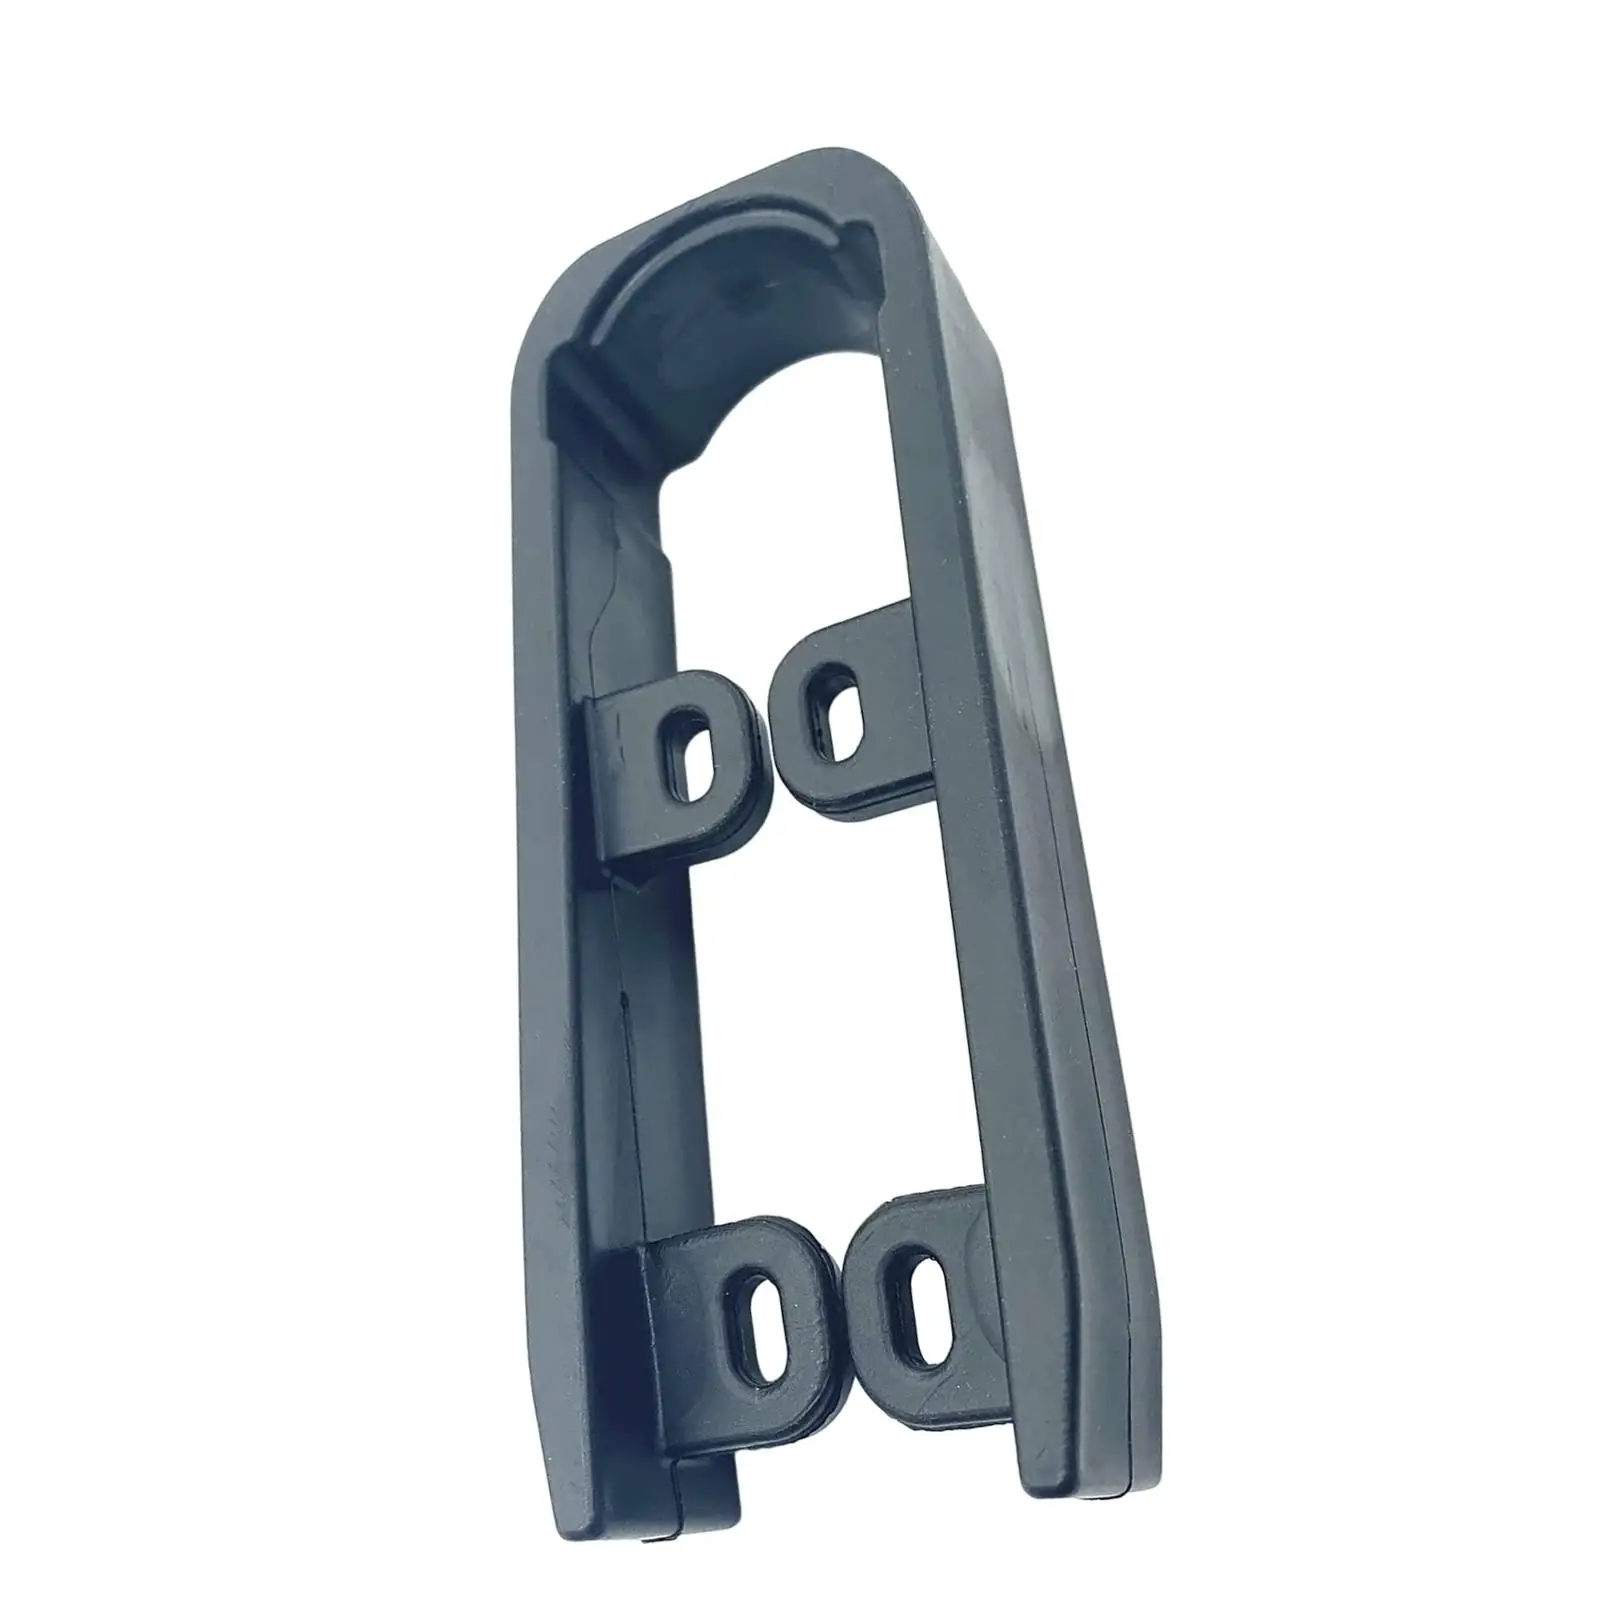 Rear Swing Arm Slider Chain 5435676-070 for 500 ATV 04-07 Accessories Replaces Durable Spare Parts